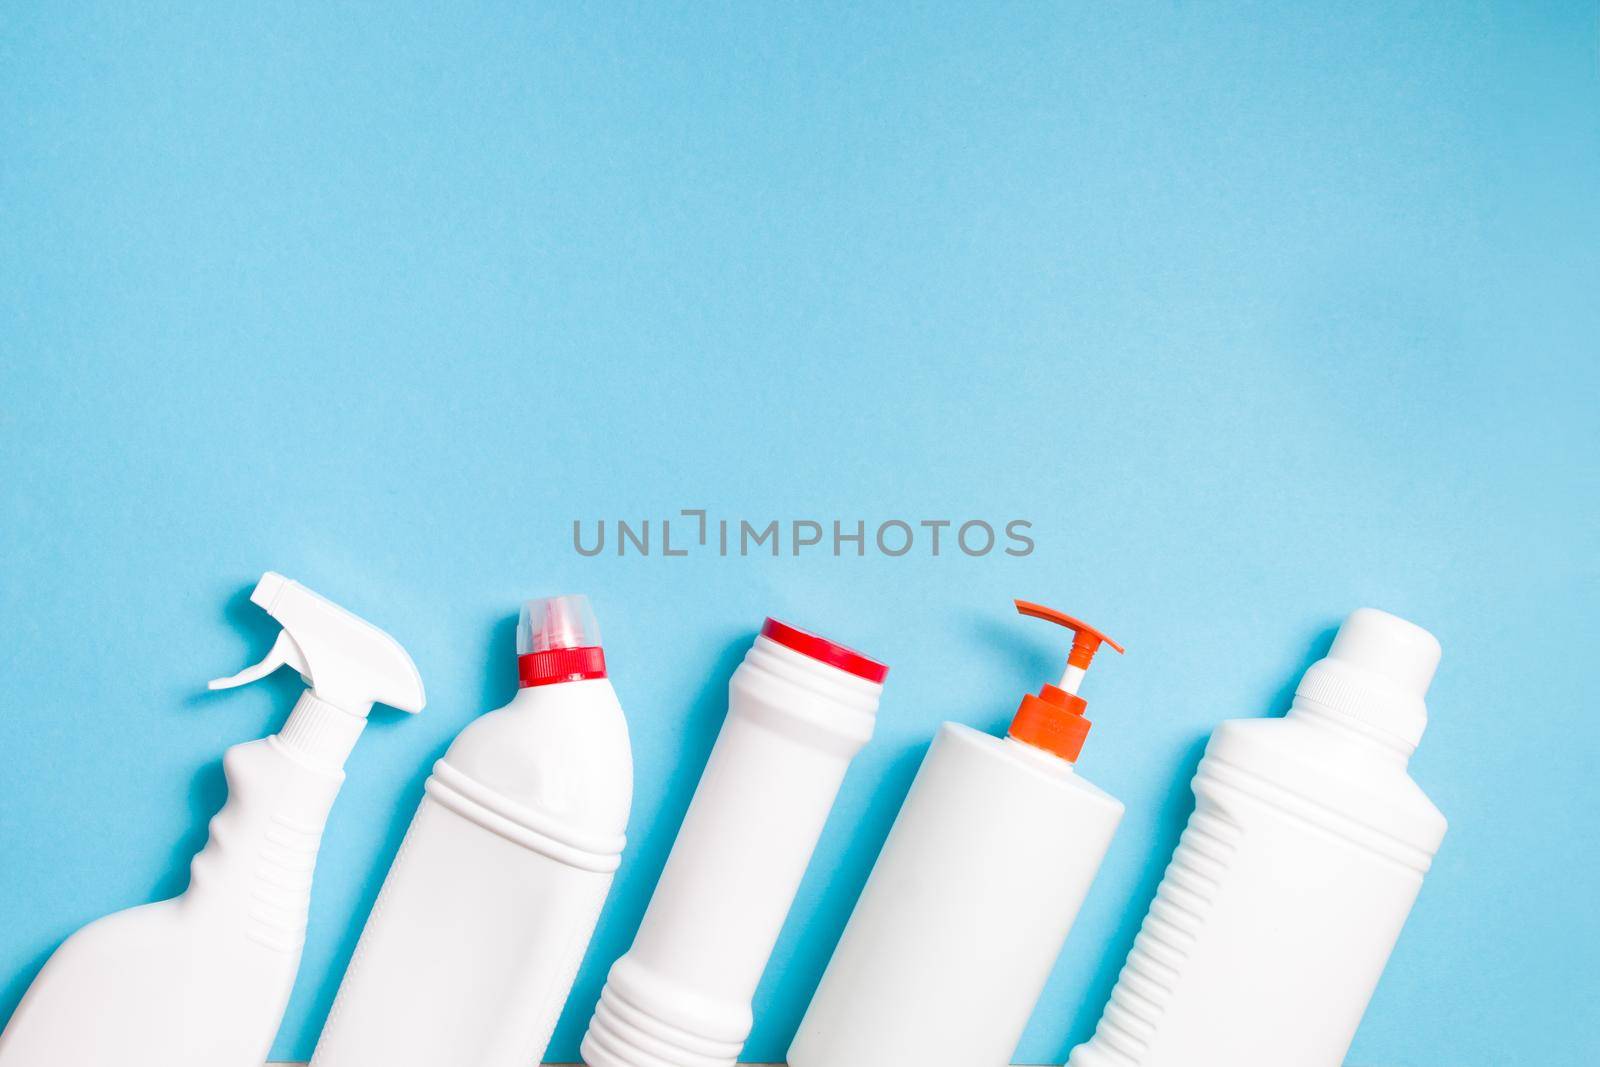 various types of white plastic bottles without labels for detergents on a light blue background; top view copy space, detergent powder bottle, toilet cleaner, liquid soap and spray bottle